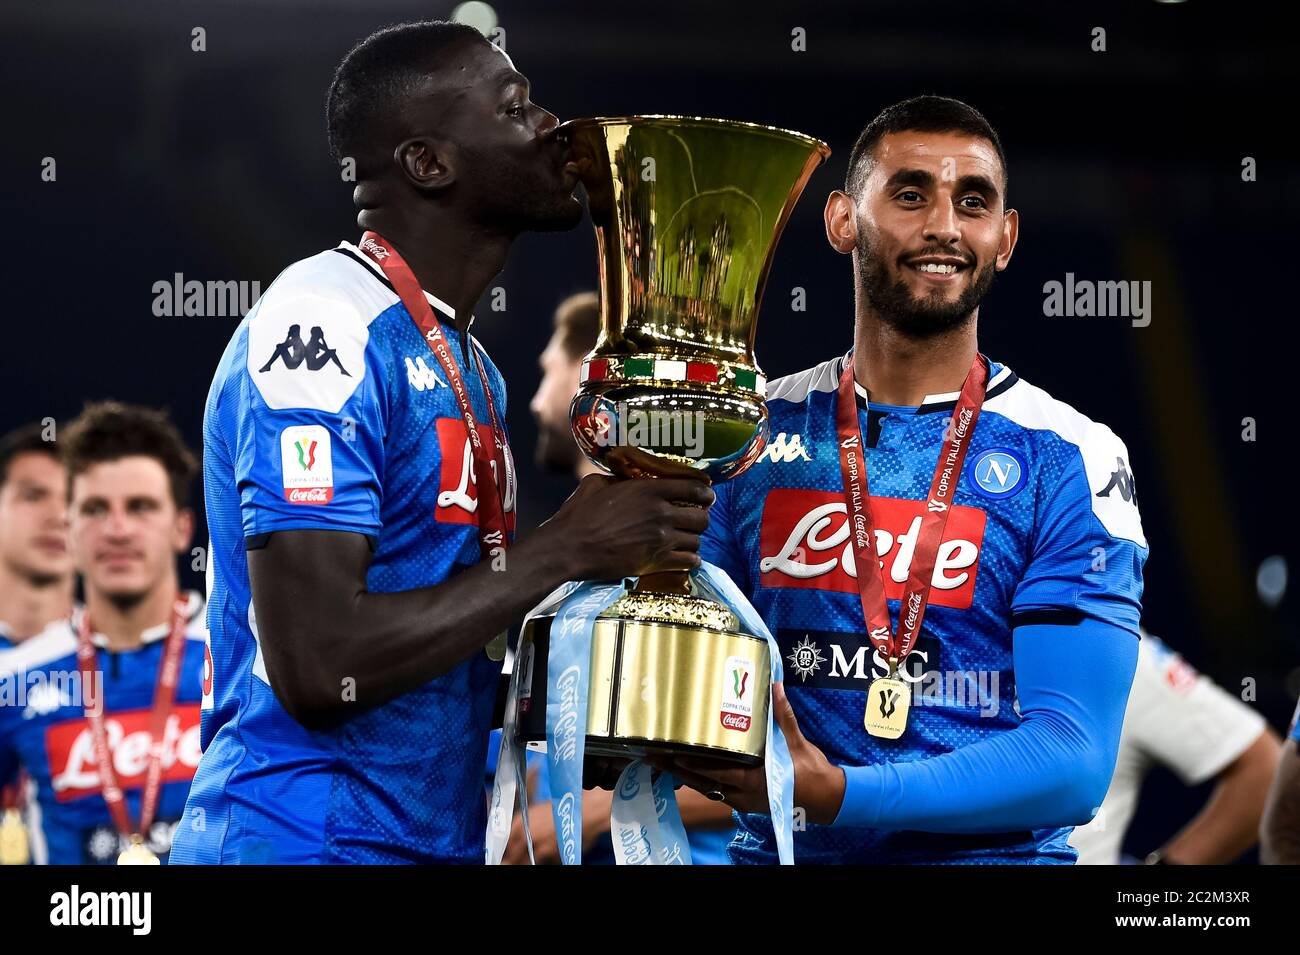 Rome, Italy. 17th June, 2020. ROME, ITALY - June 17, 2020: Kalidou Koulibaly of SSC Napoli and Faouzi Ghoulam of SSC Napoli celebrate with the trophy during the Coppa Italia final football match between SSC Napoli and Juventus FC. (Photo by Nicolò Campo/Sipa USA) Credit: Sipa USA/Alamy Live News Stock Photo